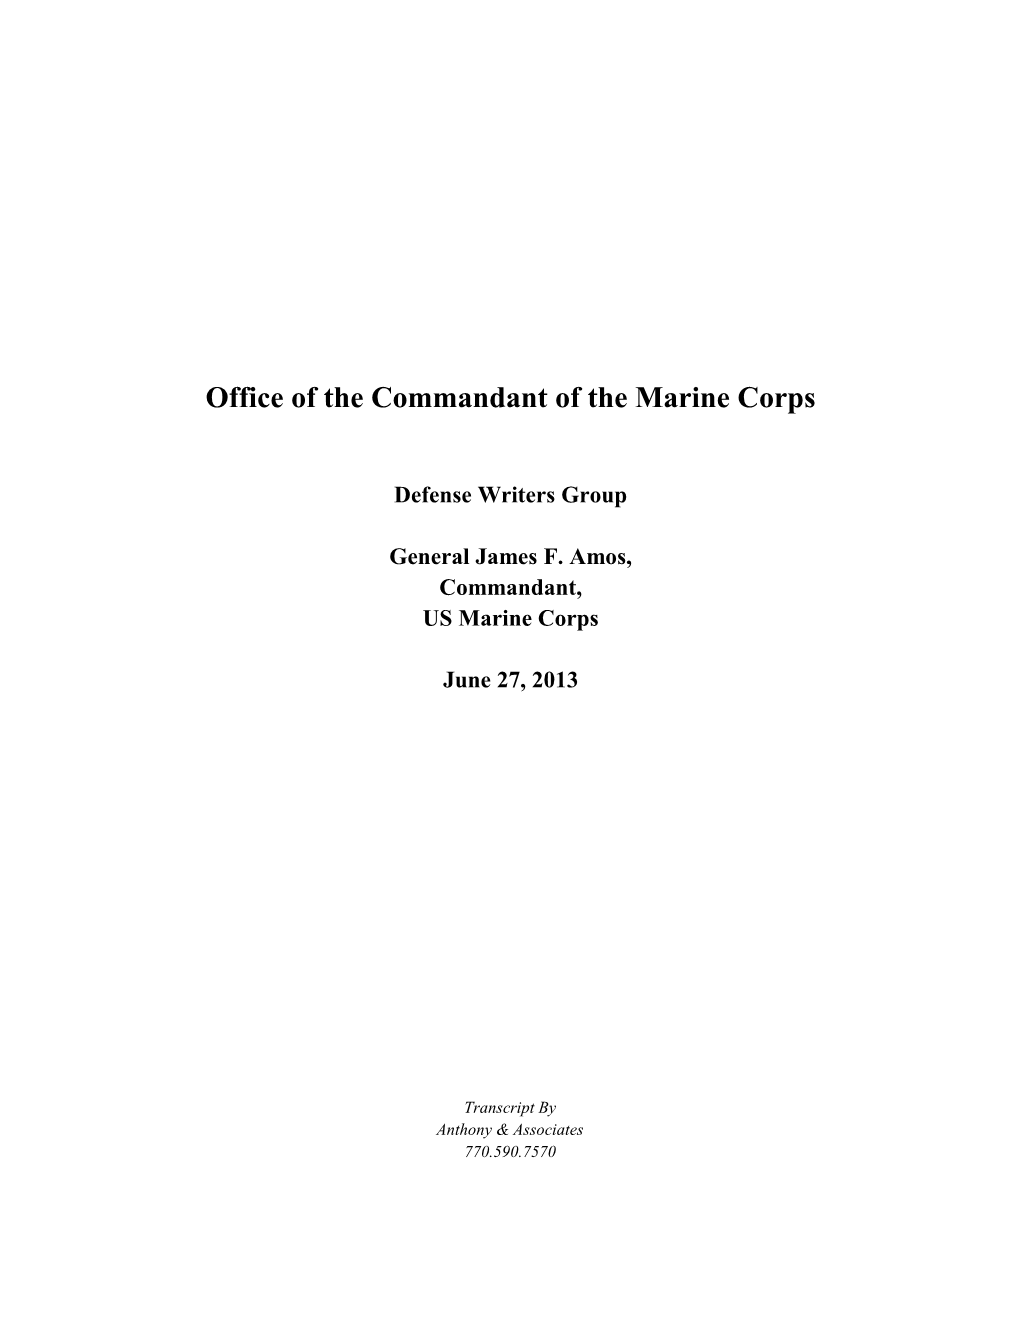 Office of the Commandant of the Marine Corps